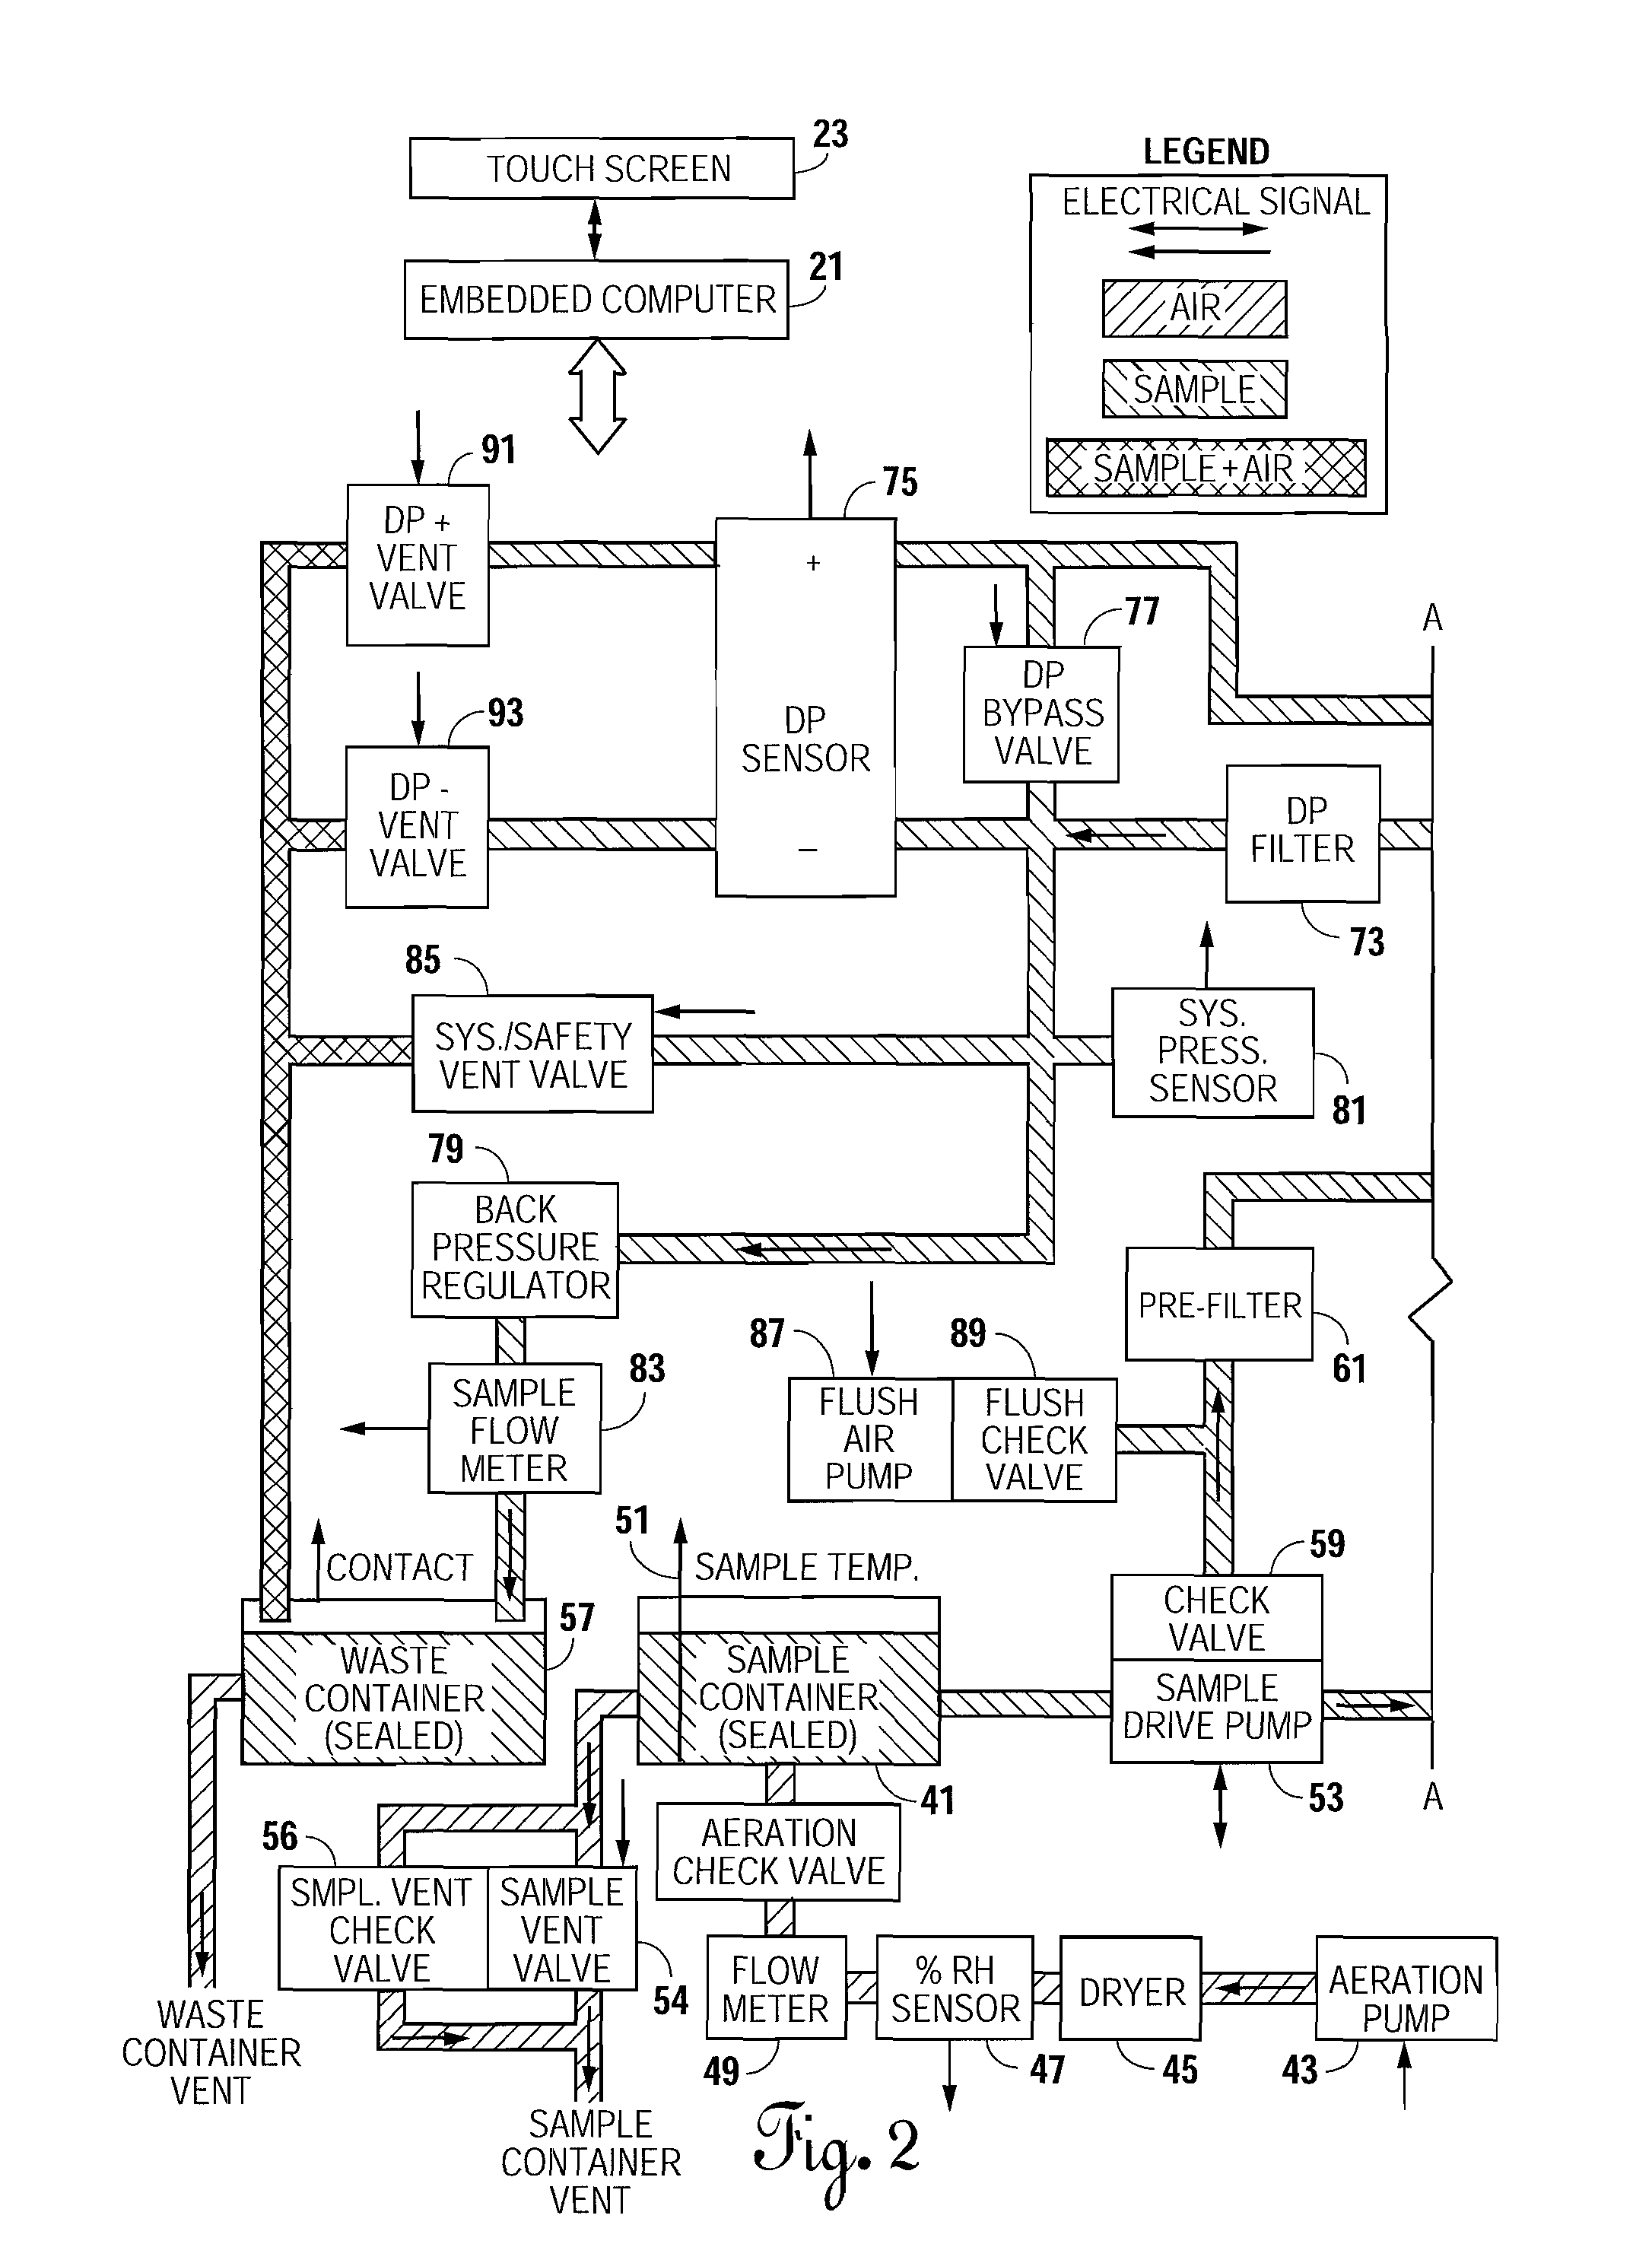 Apparatus and Method for Determining the Thermal Stability of Fluids